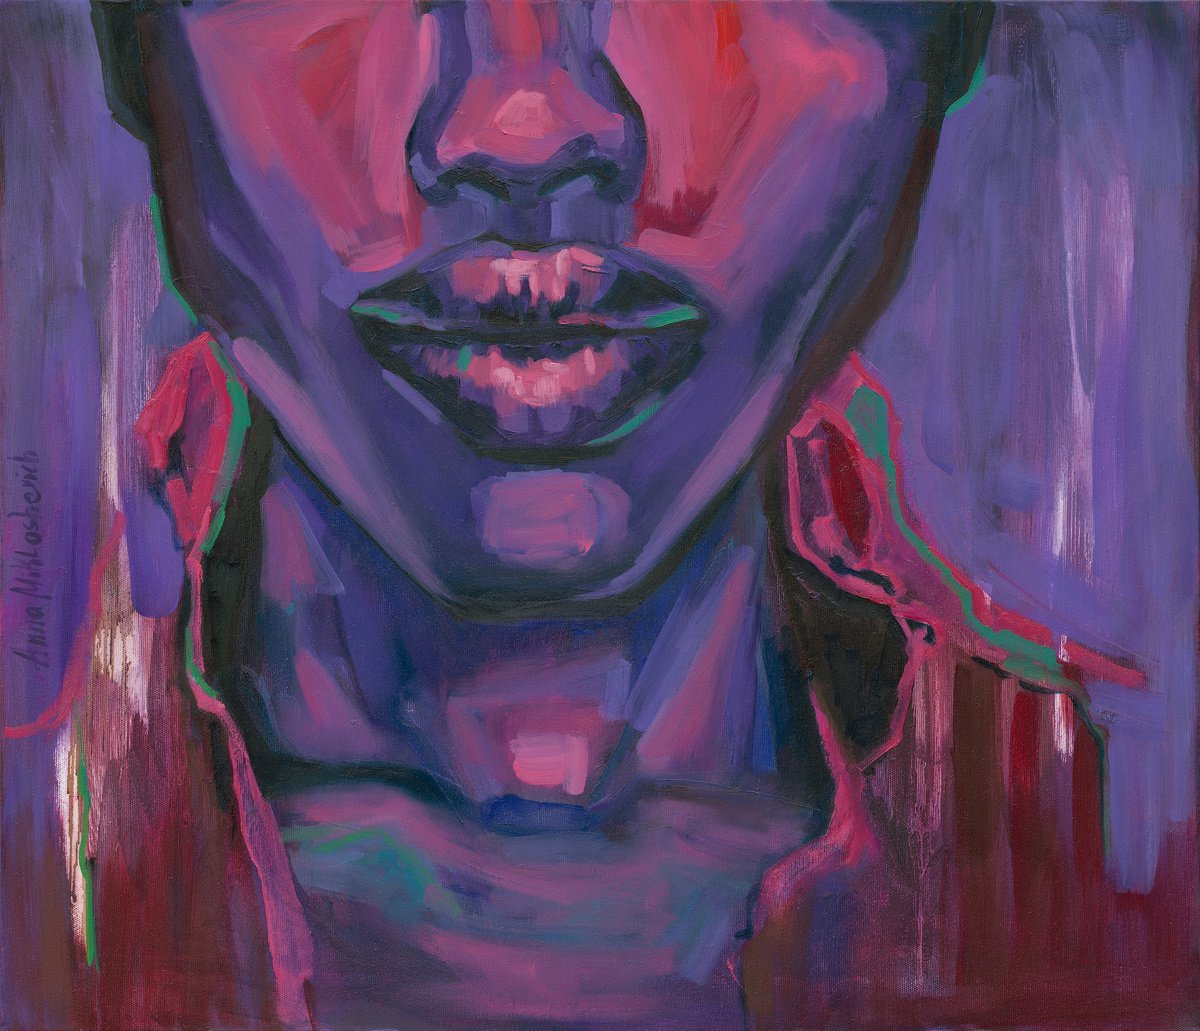 BELIEVER - African purple original painting on canvas by Anna Miklashevich